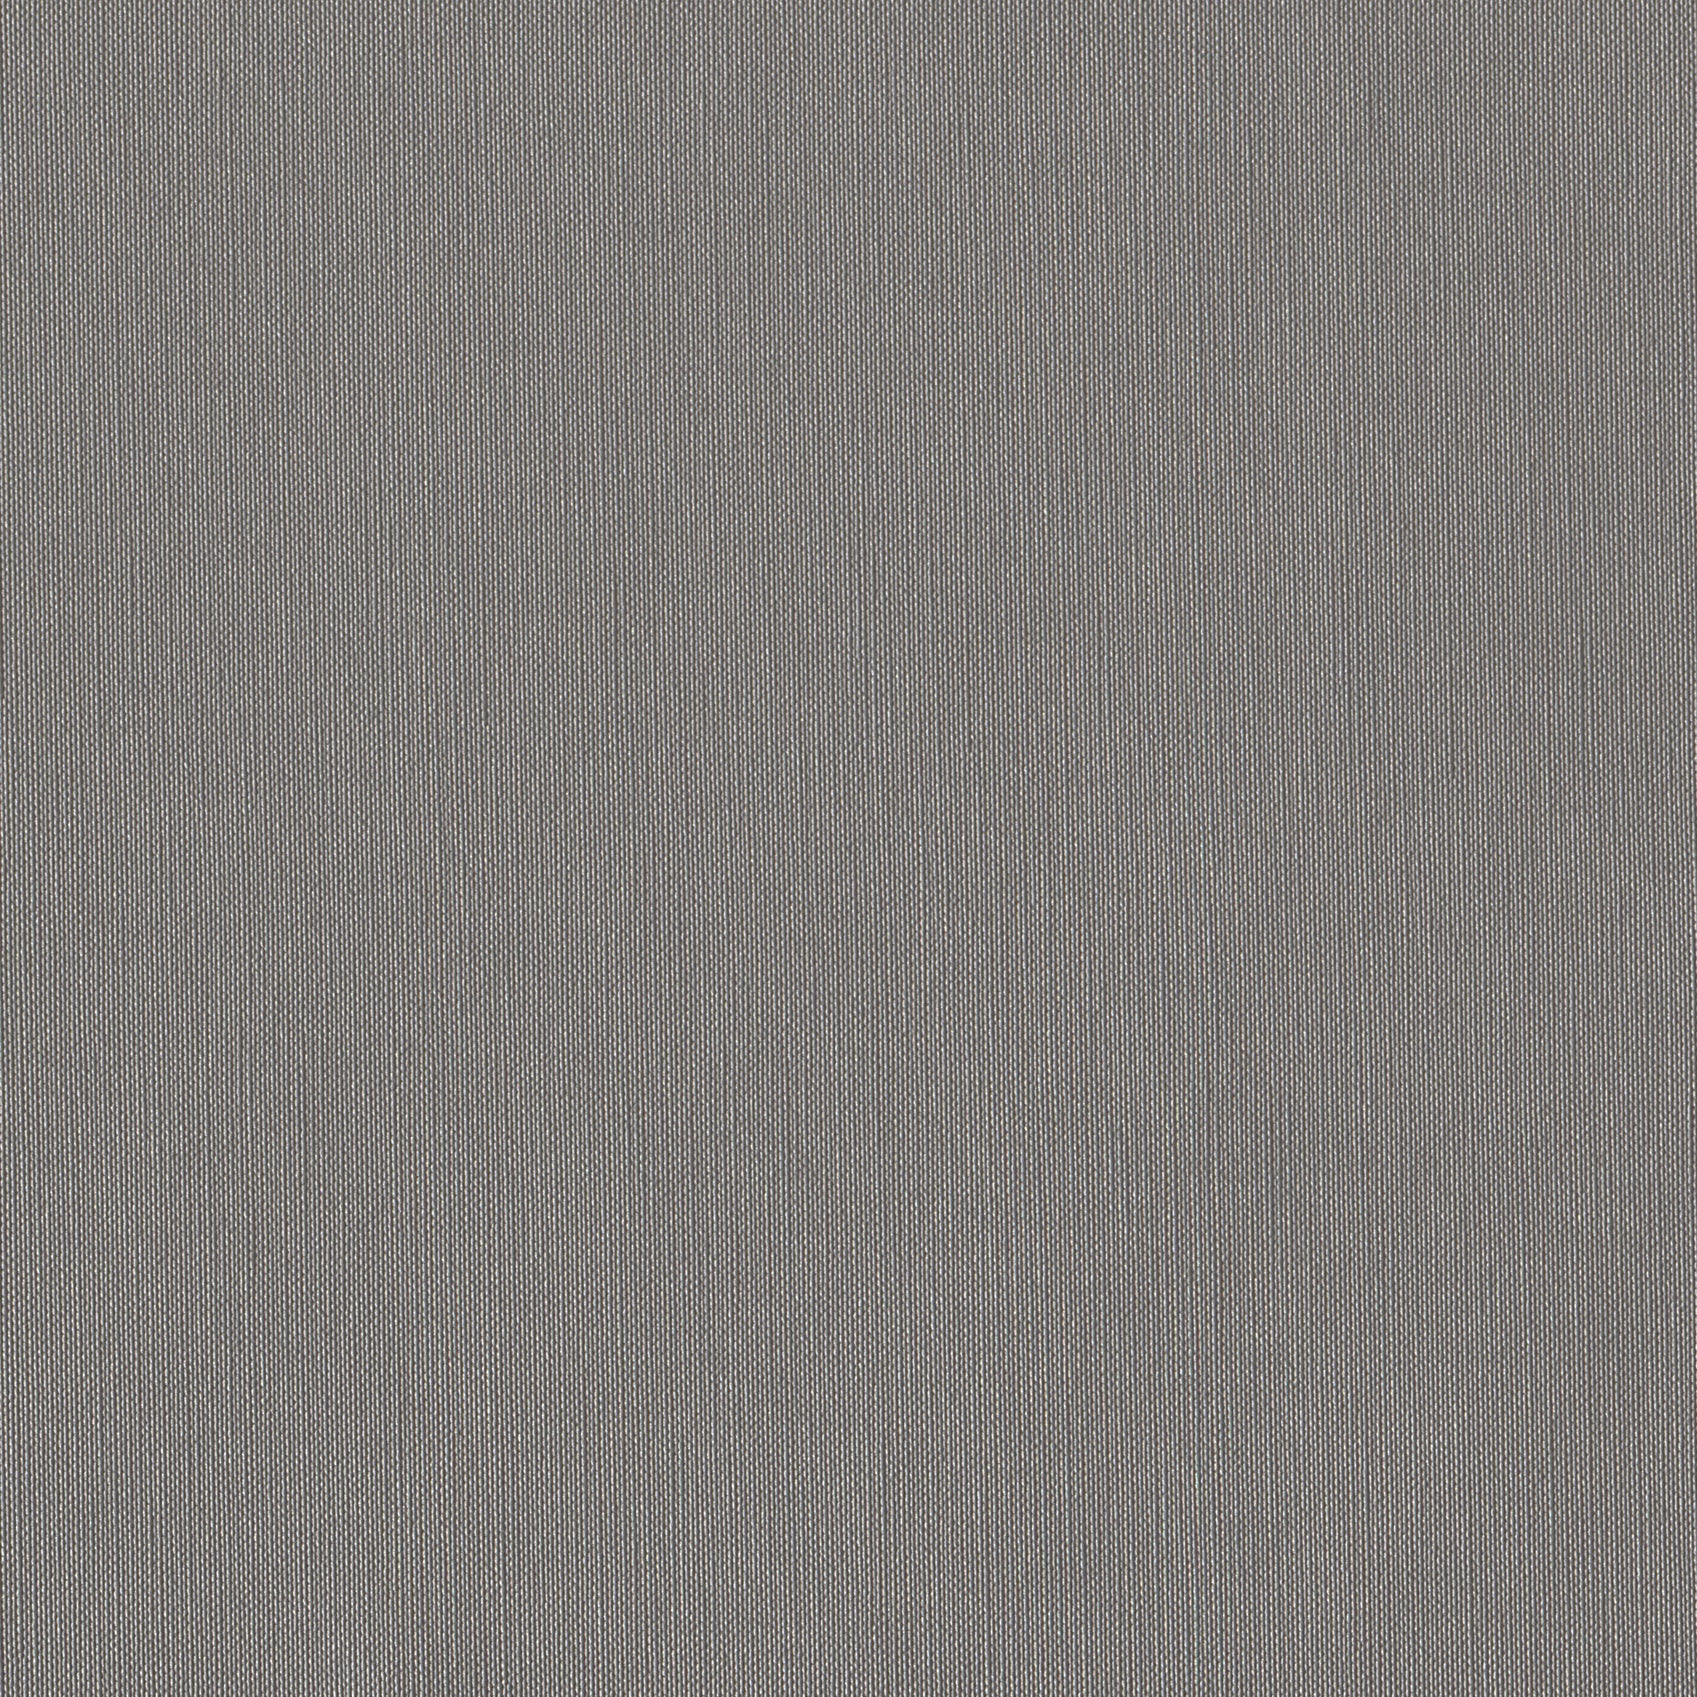       Andriali-Contract-Vinyl_Upholstery-Design-LegendFR-FR5-Color-605R.Silver-Width-140cm